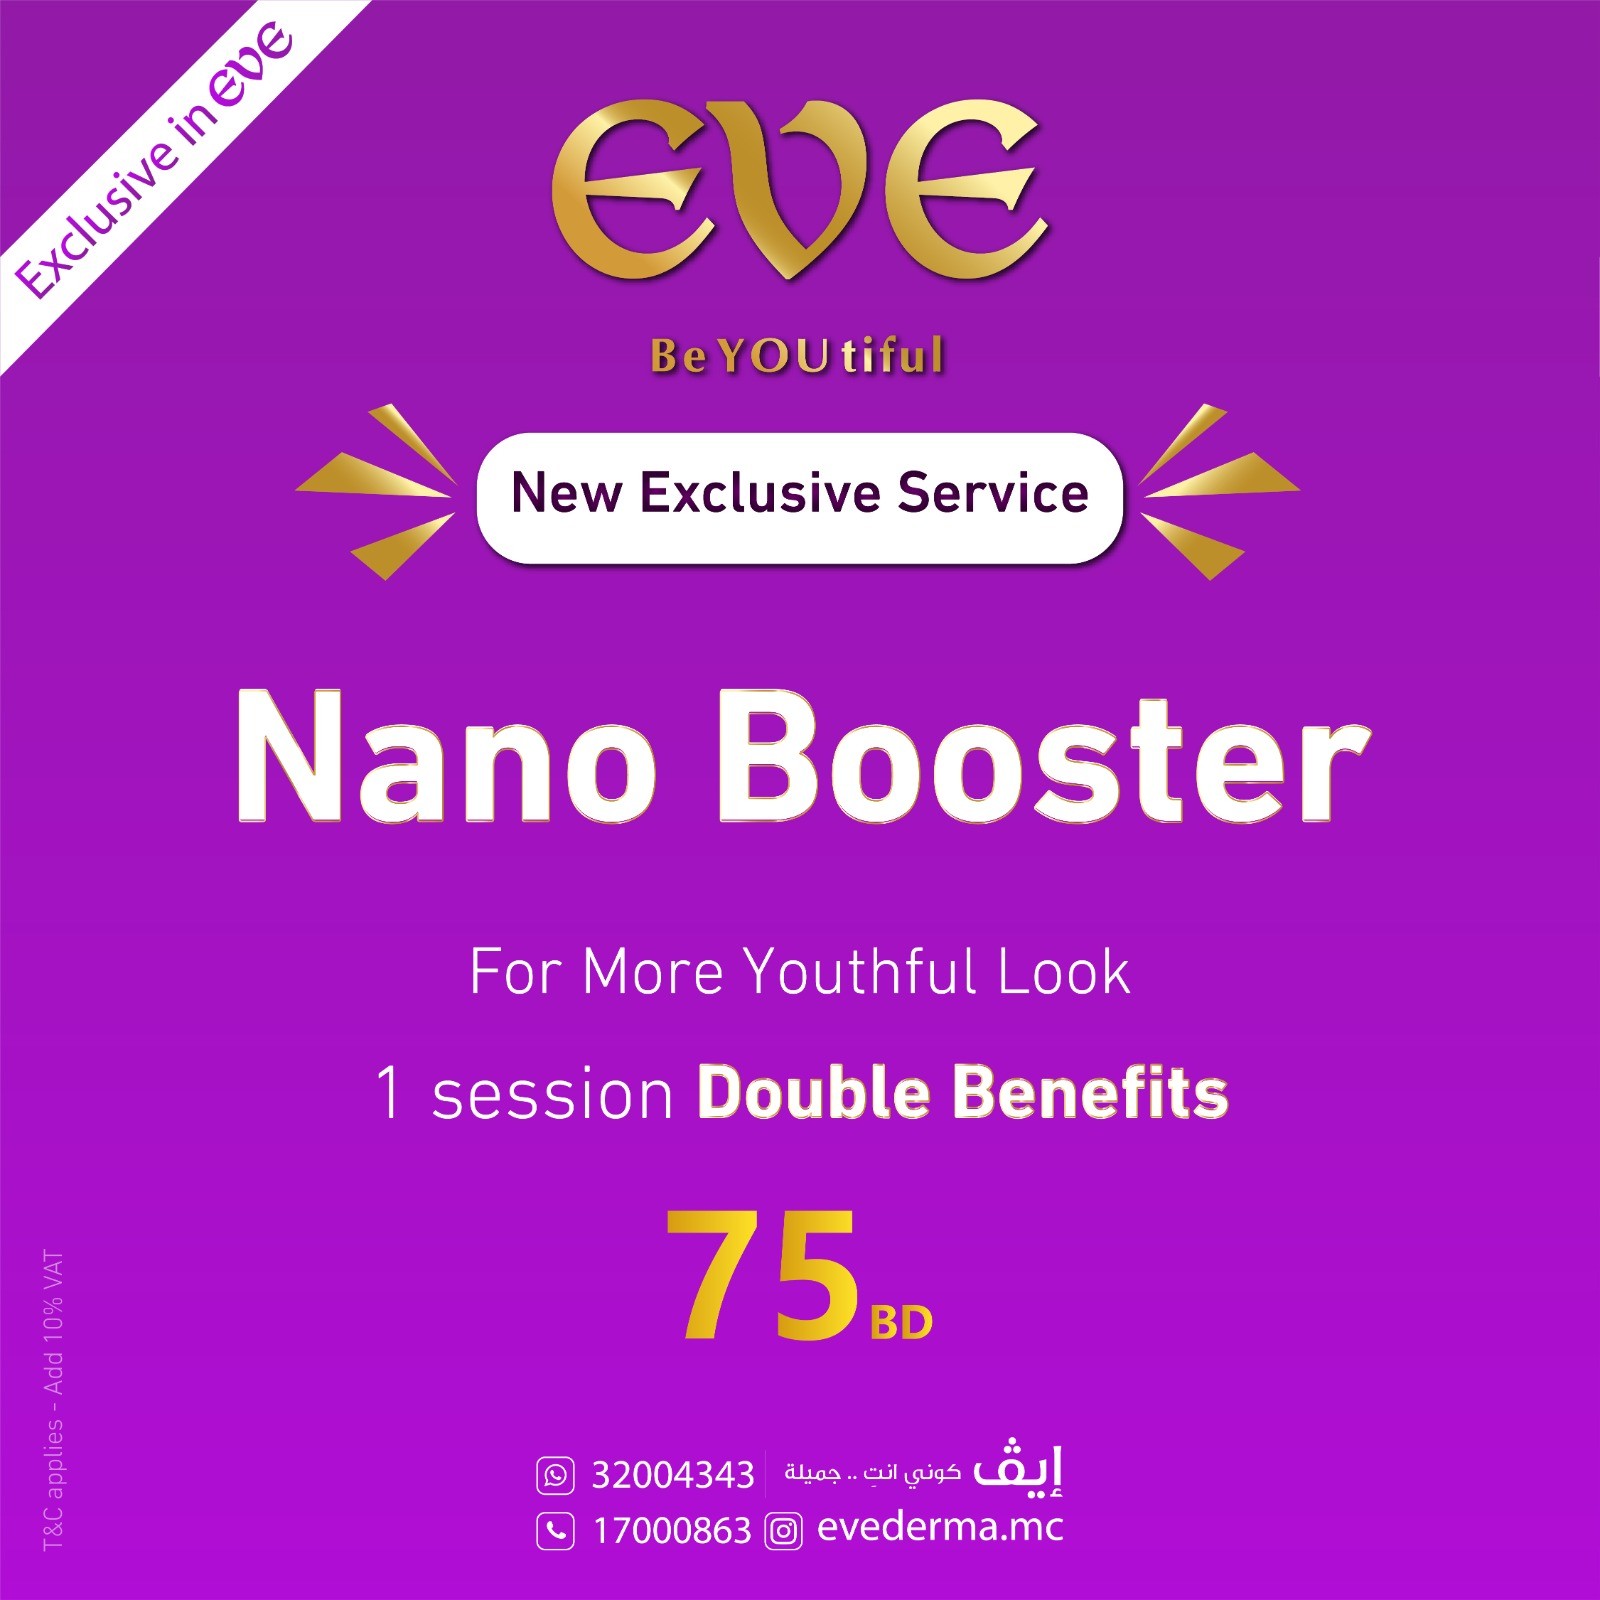 Nano Booster NEW Exclusive Service in EVE ONLY